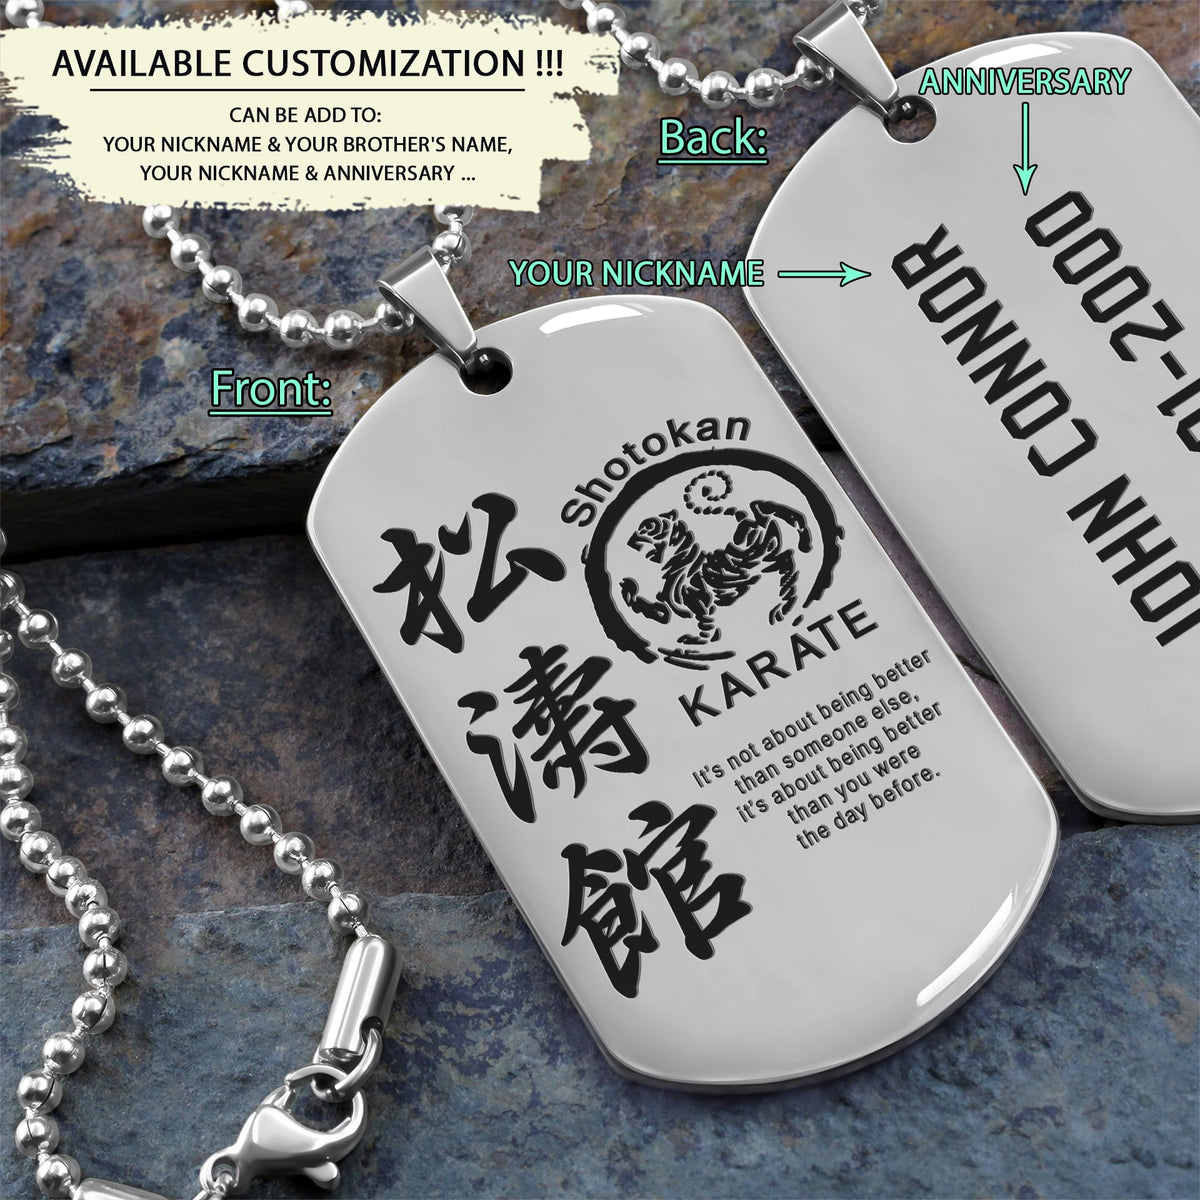 KAD001 - IIt’s Not About Being Better Than Someone Else - It’s About Being Better Than You Were The Day Before - Shotokan Karate - Engrave Silver Dogtag